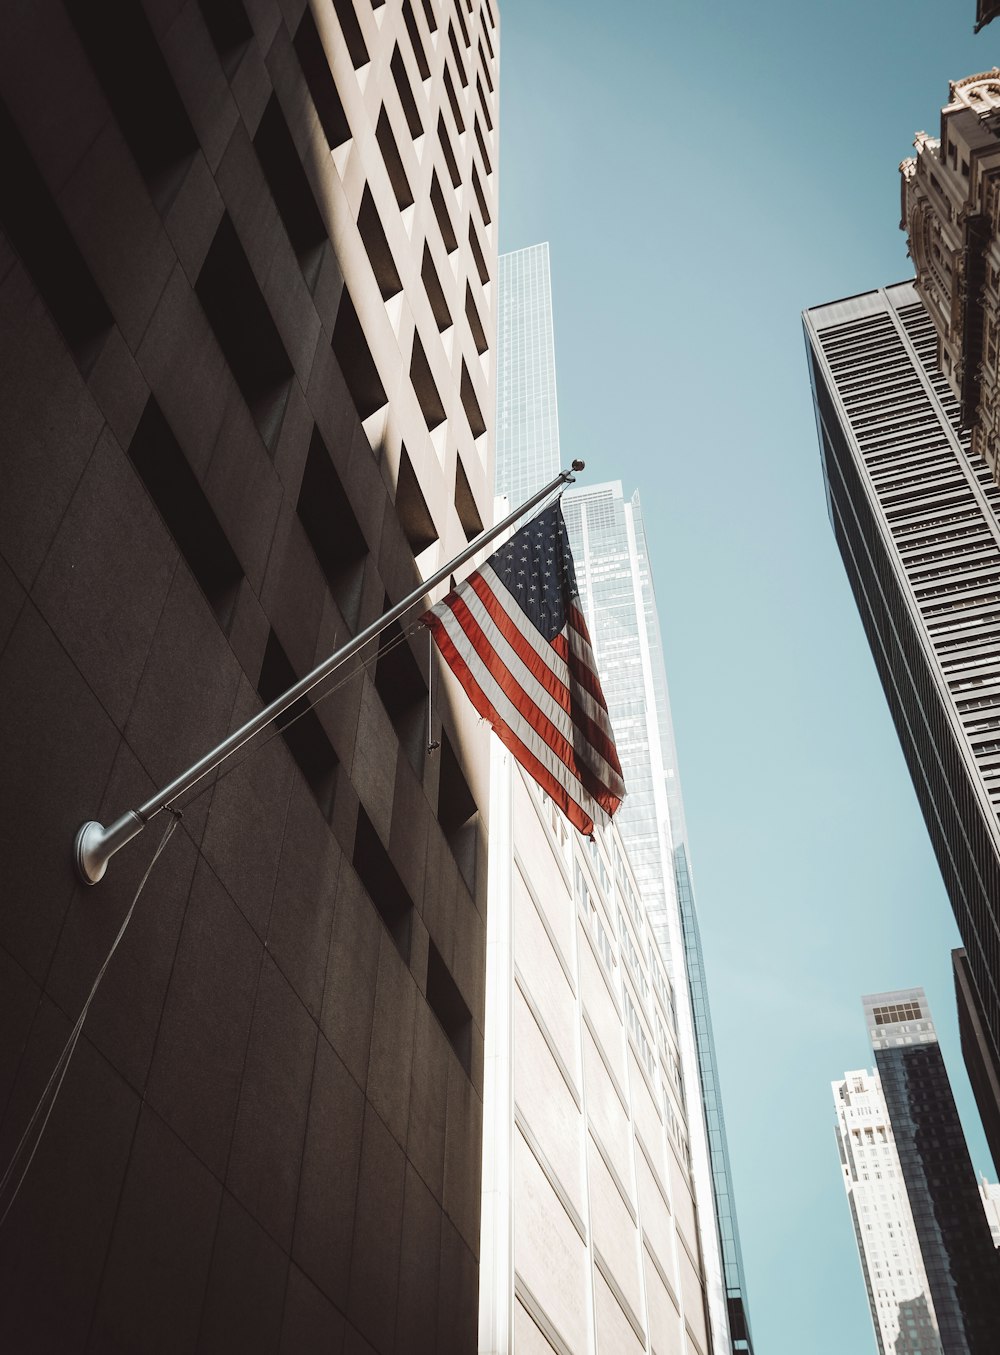 an american flag hanging from the side of a tall building